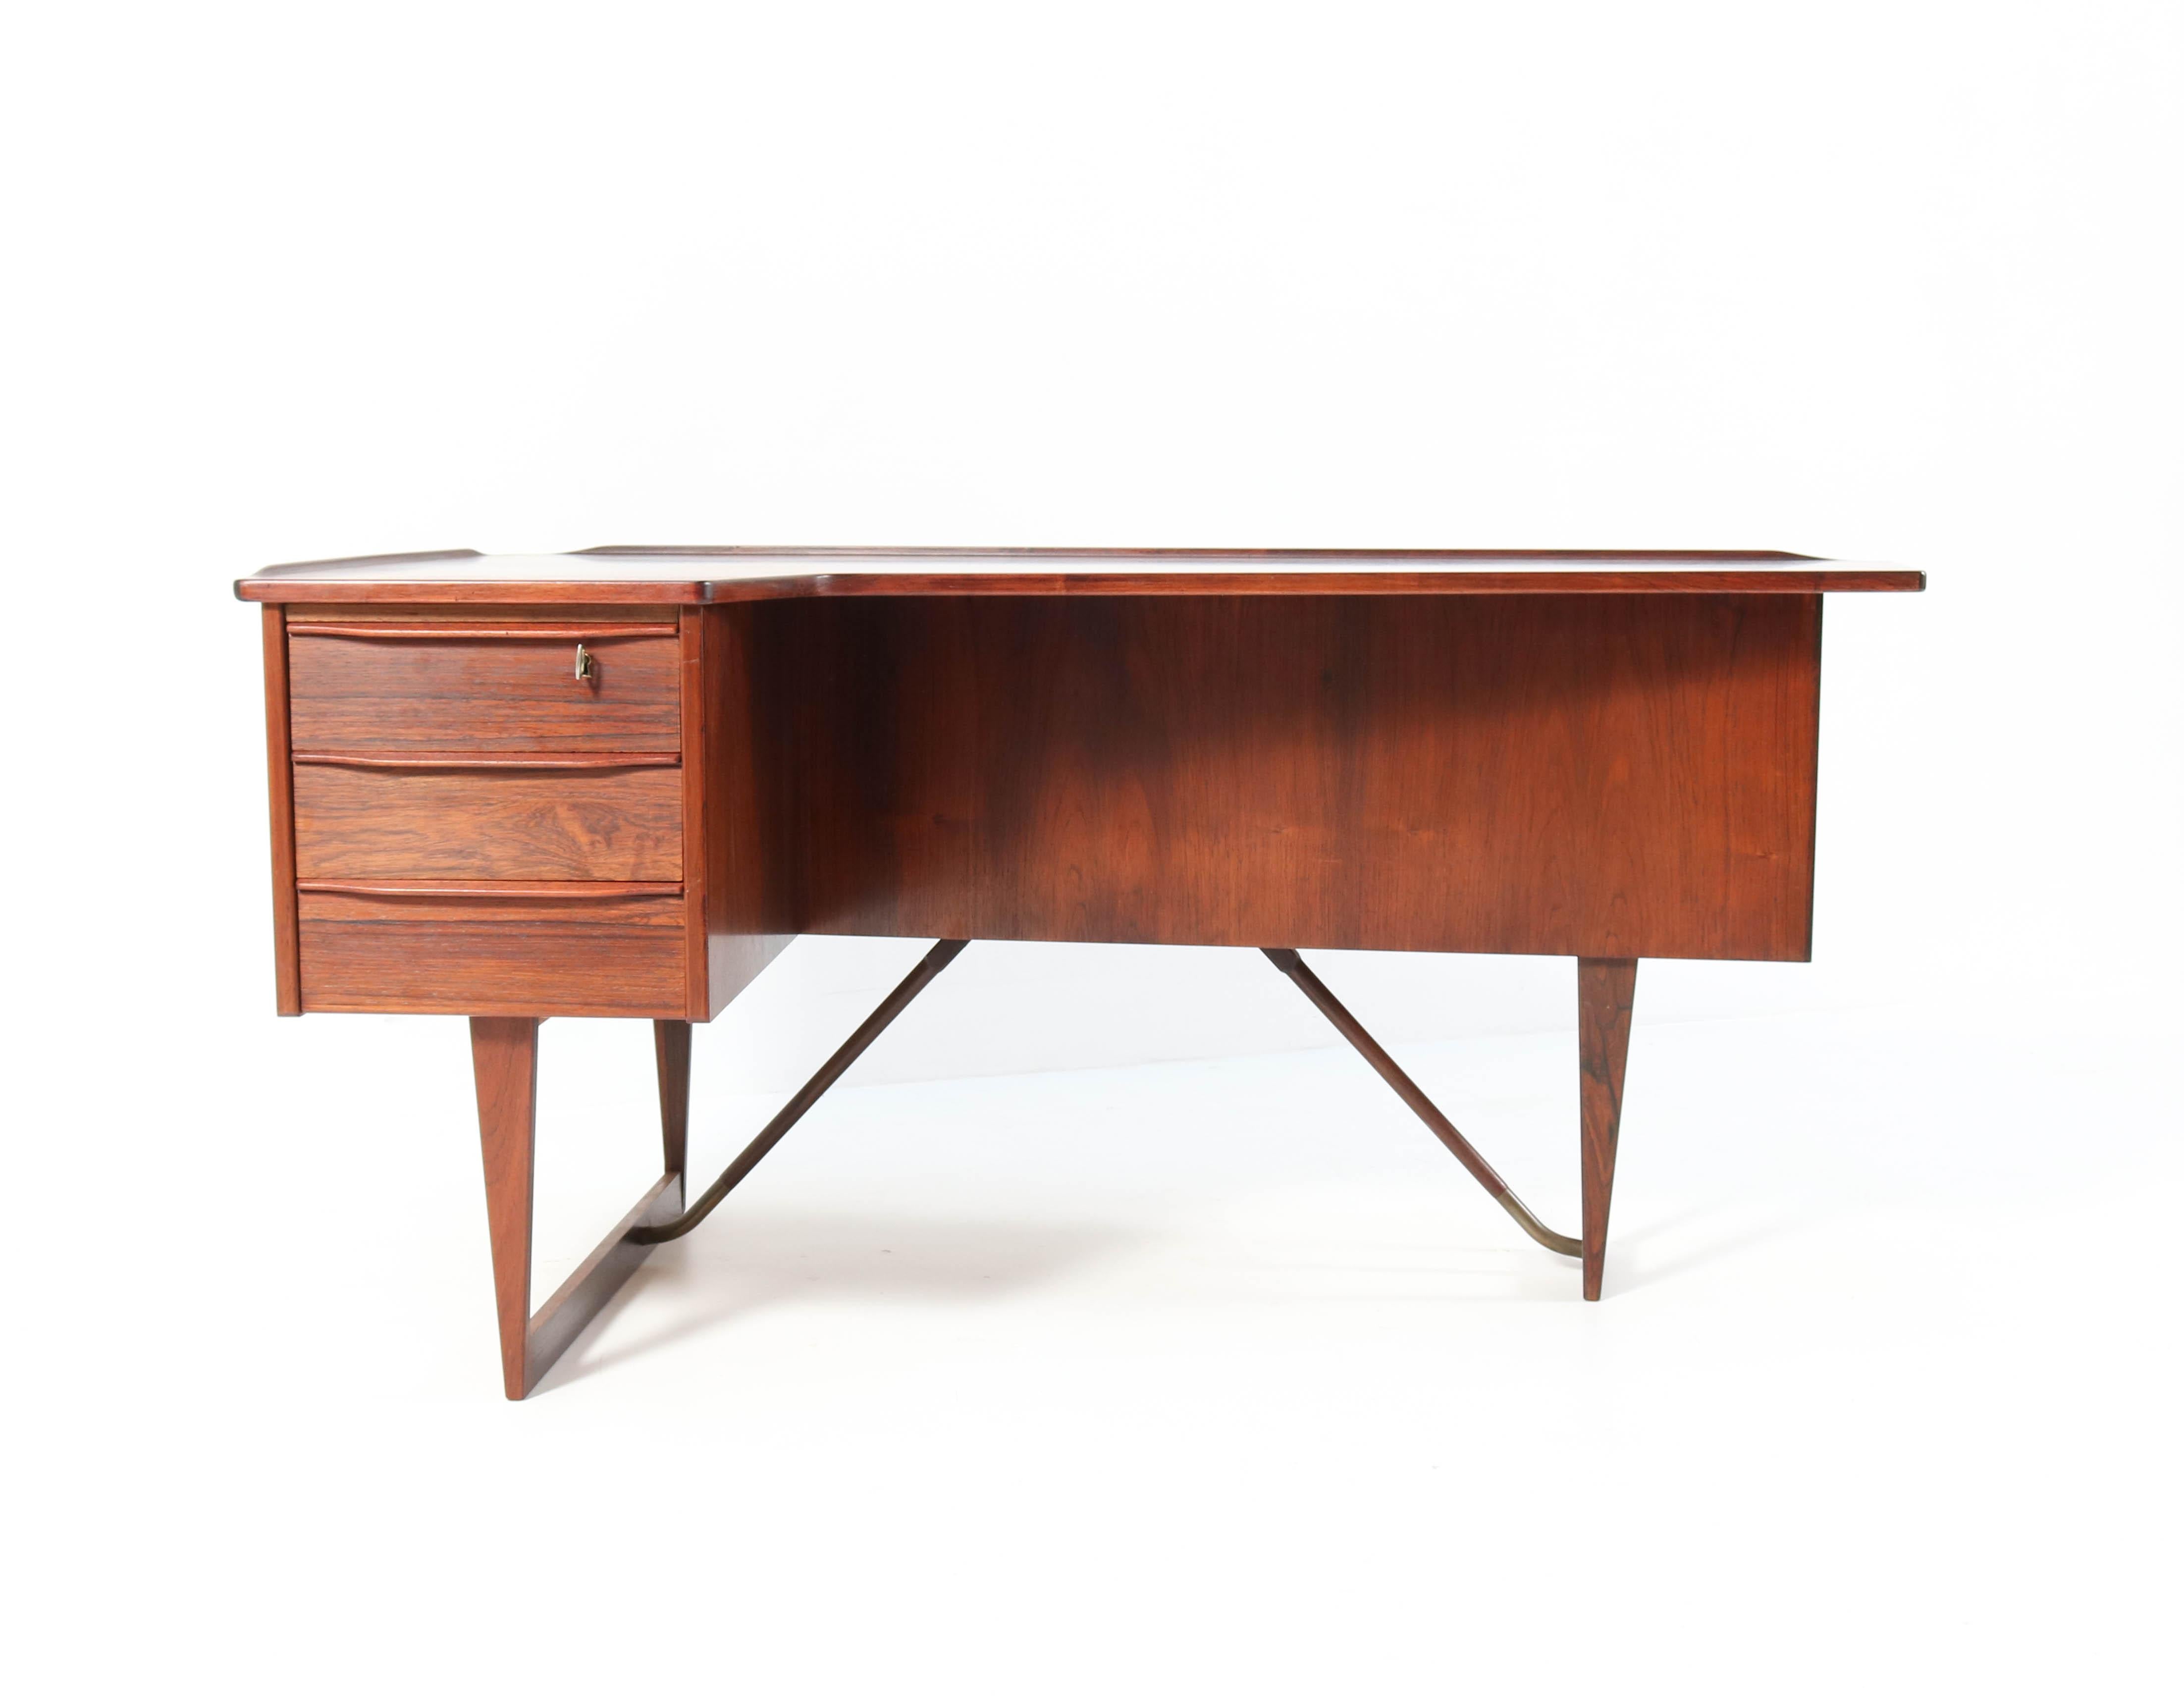 Wonderful shaped Mid-Century Modern boomerang desk.
Design by Peter Løvig Nielsen for Hedensted Møbelfabrik.
Striking Danish design from the fifties.
Solid rosewood and rosewood veneer with a nice warm grain.
This fantastic piece of furniture